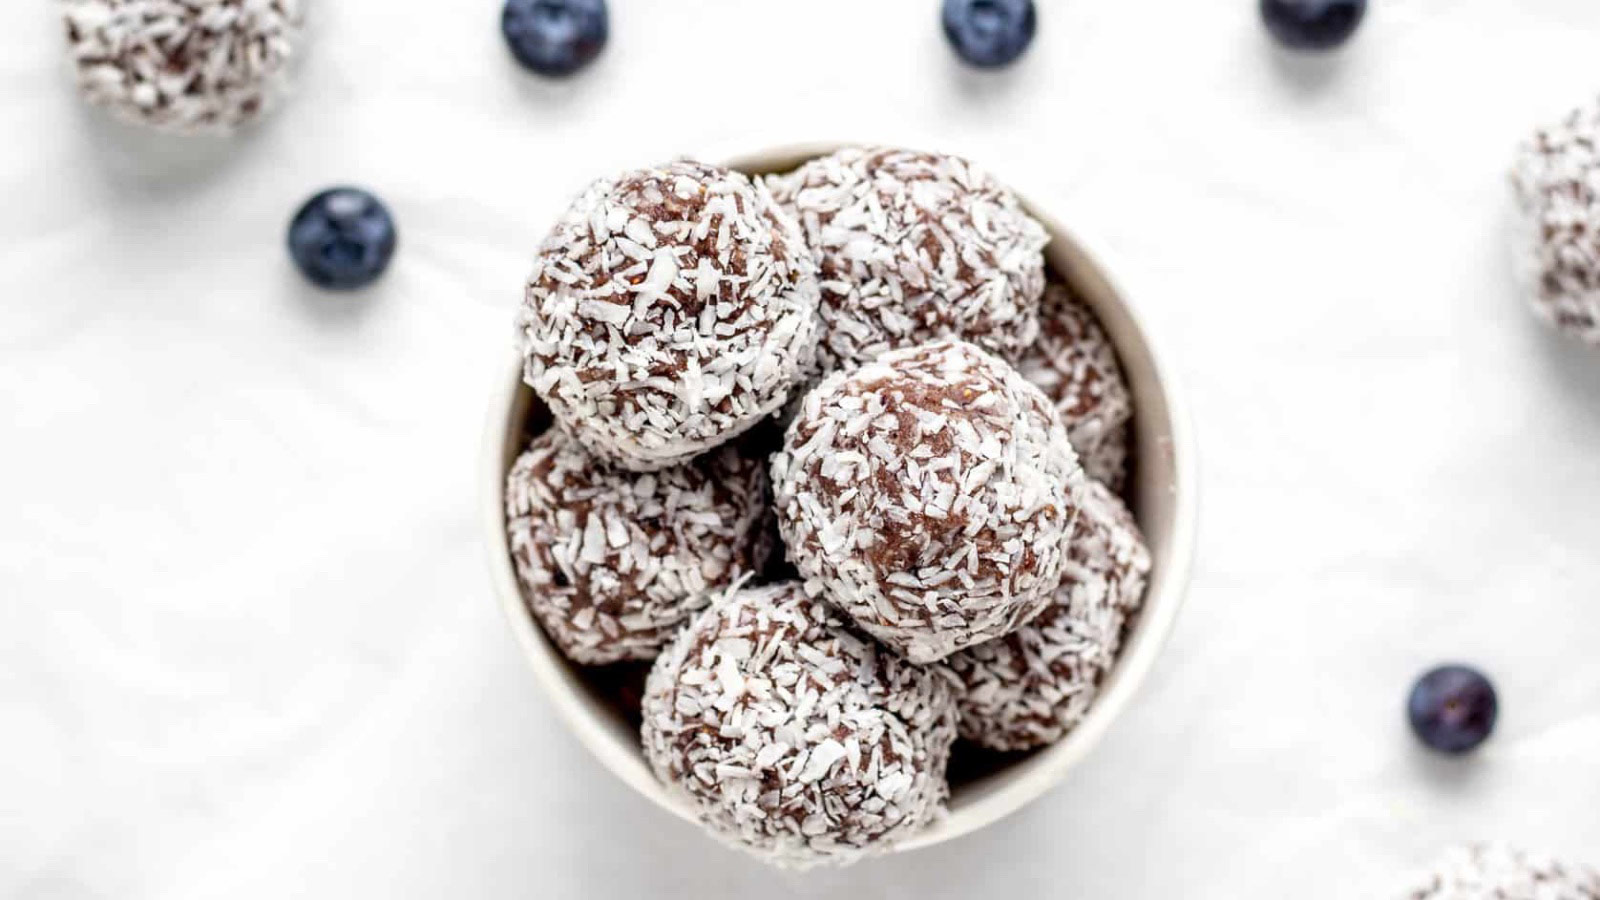 <p>You are going to love how portable and tasty these healthy <a href="https://healthykidsrecipes.com/blueberry-bliss-balls/" rel="external noopener noreferrer" title=" External link. Opens in a new tab.">blueberry bliss balls</a> are. This is a bite-sized berry-flavored snack the whole family will enjoy, and they are perfect for eating in the car or on the go. They are naturally sweetened and packed with fiber and protein to keep you going strong.</p>